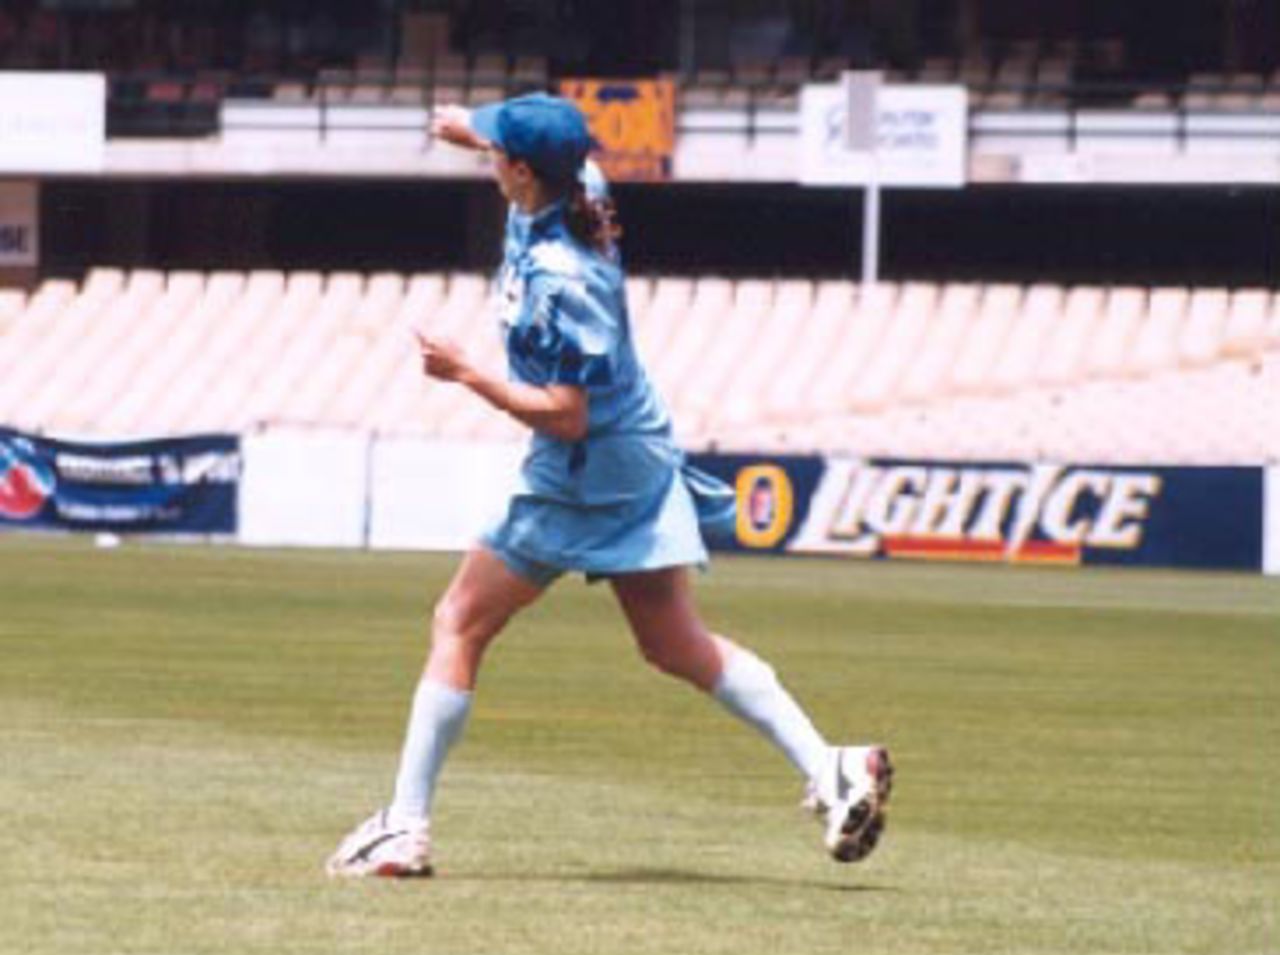 Therese McGregor fielding for NSW in the 2nd Australian NWCL final, 18 December 1999